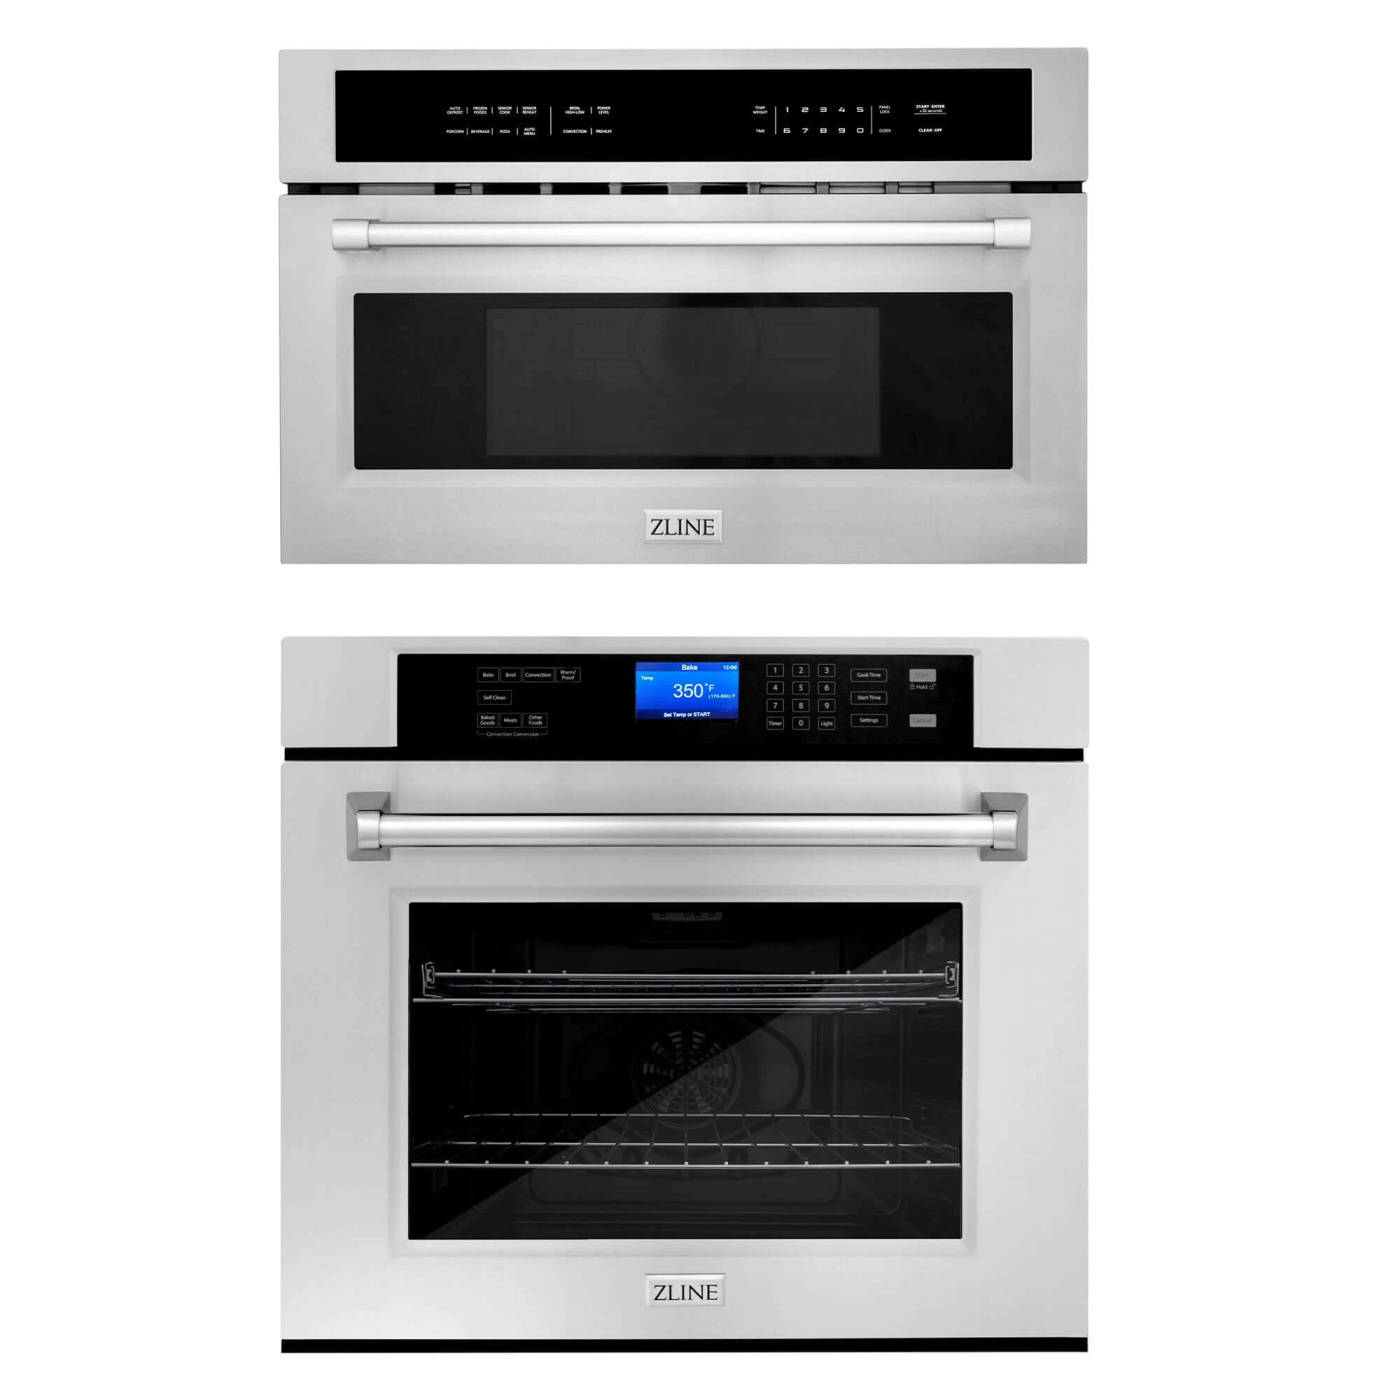 ZLINE Stainless Steel 30 in. Built-in Convection Microwave Oven and 30 in. Single Wall Oven with Self Clean (2KP-MW30-AWS30) - white background